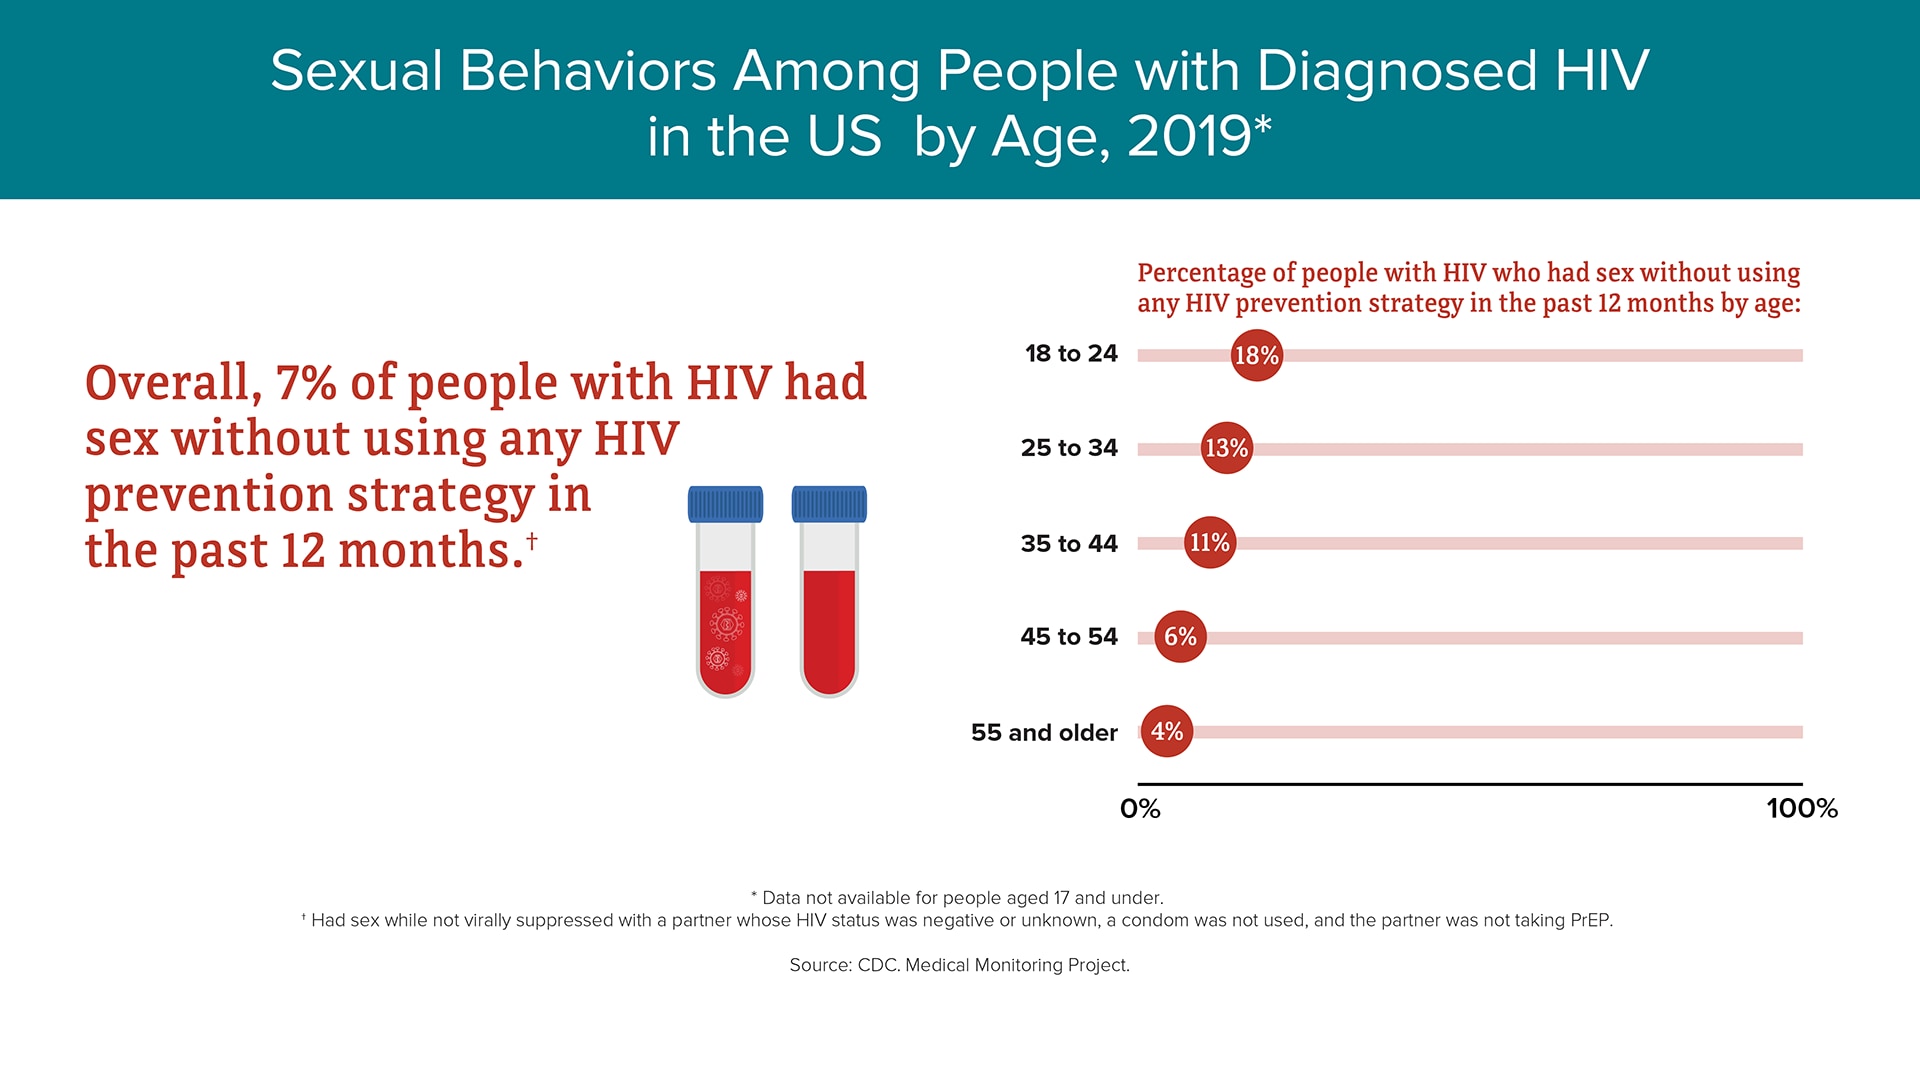 Hiv Risk Behaviors Hiv By Age Hiv By Group Hivaids Cdc